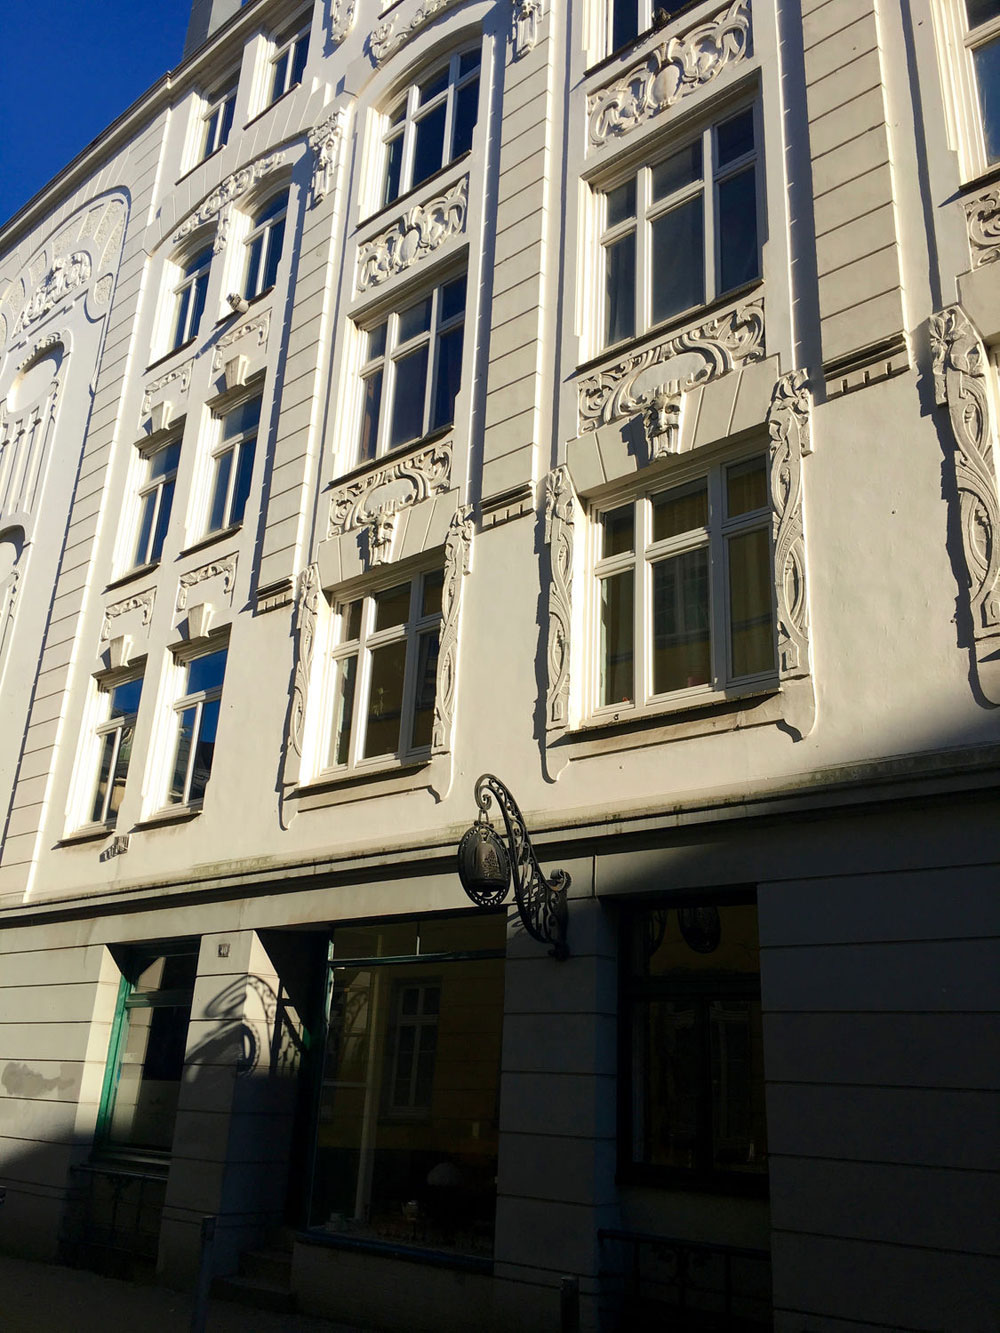 Building in St. Georg